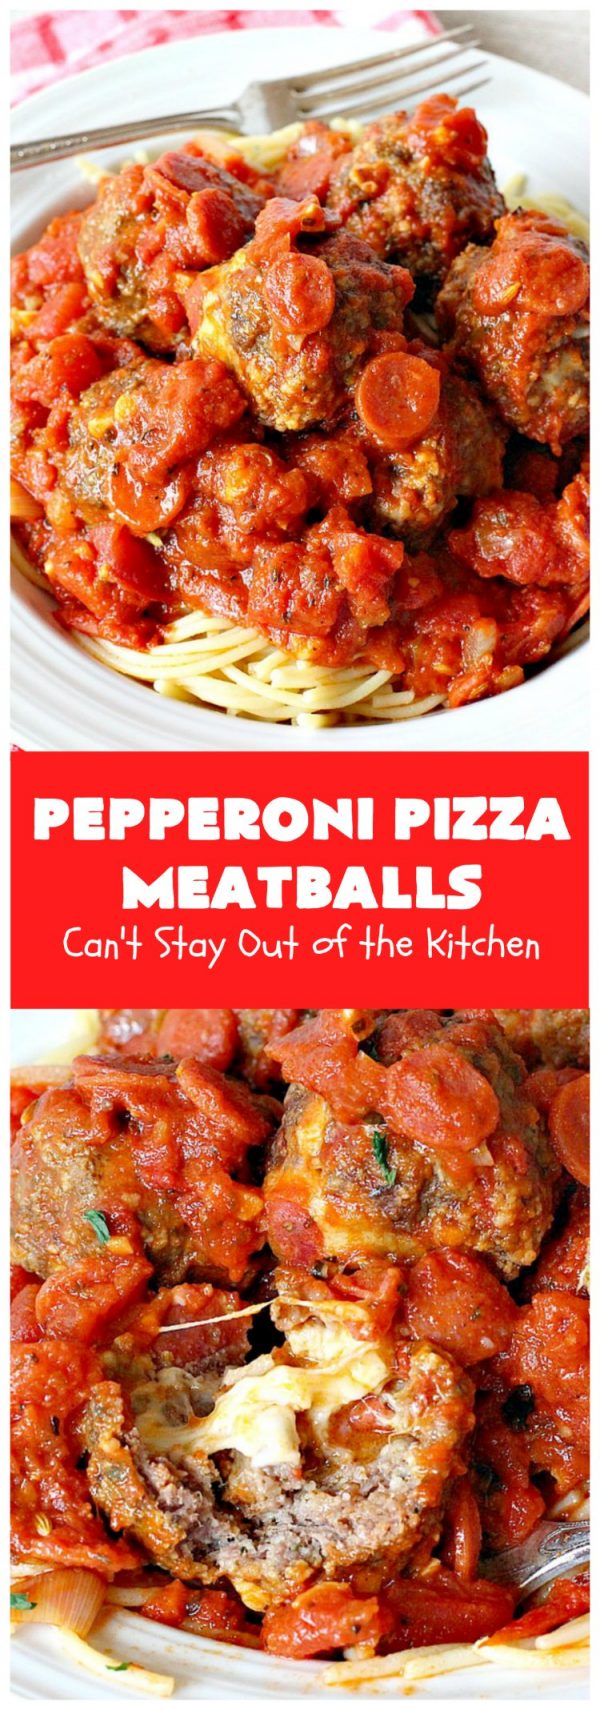 Pepperoni Pizza Meatballs – Can't Stay Out of the Kitchen